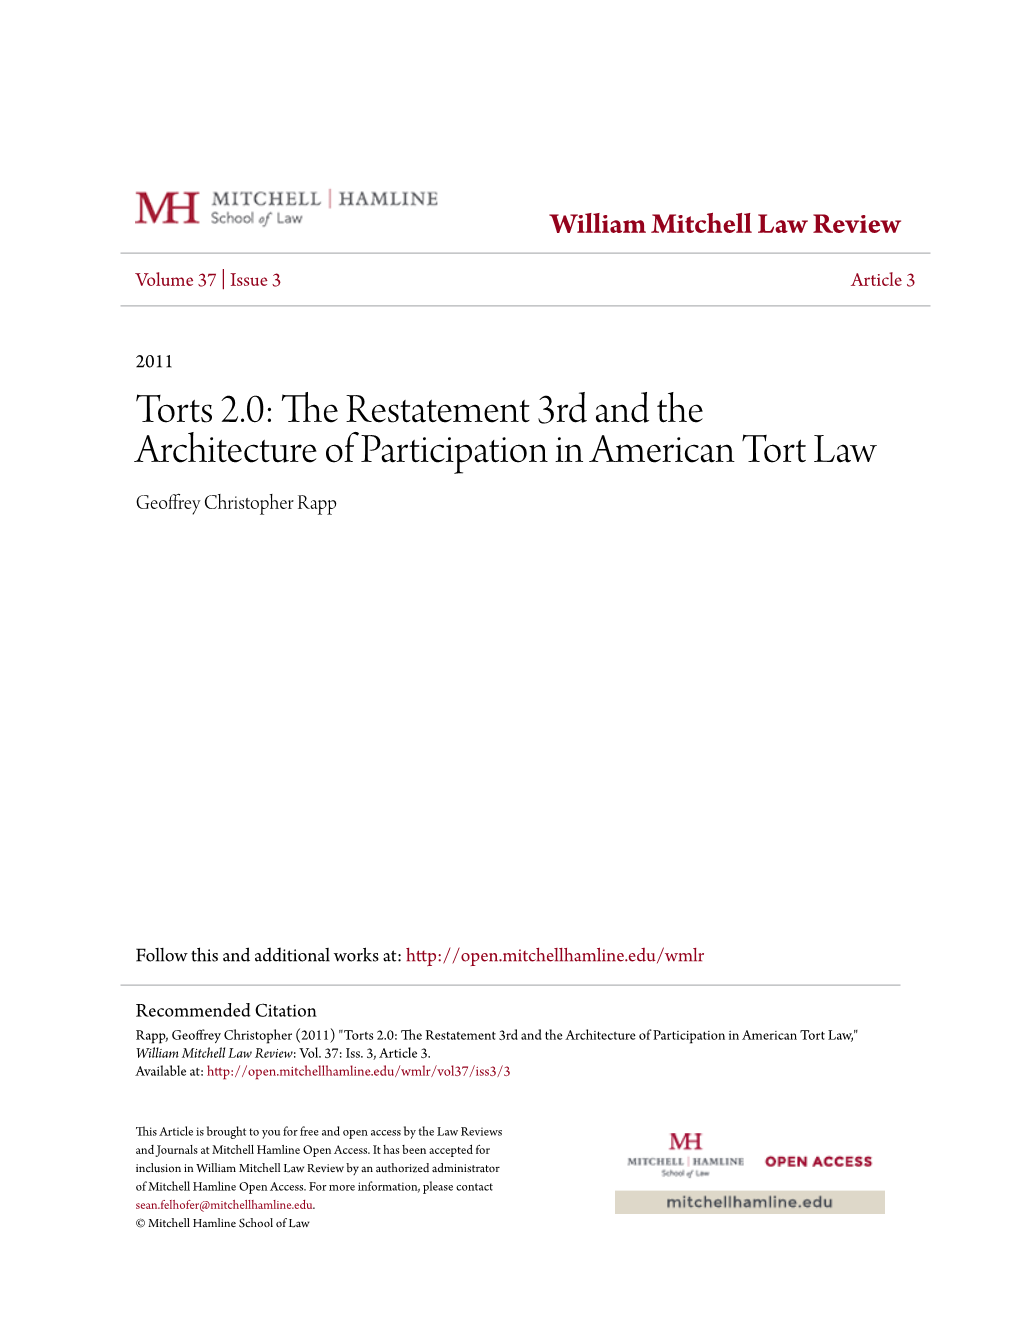 Torts 2.0: the Restatement 3Rd and the Architecture of Participation in American Tort Law Geoffrey Christopher Rapp